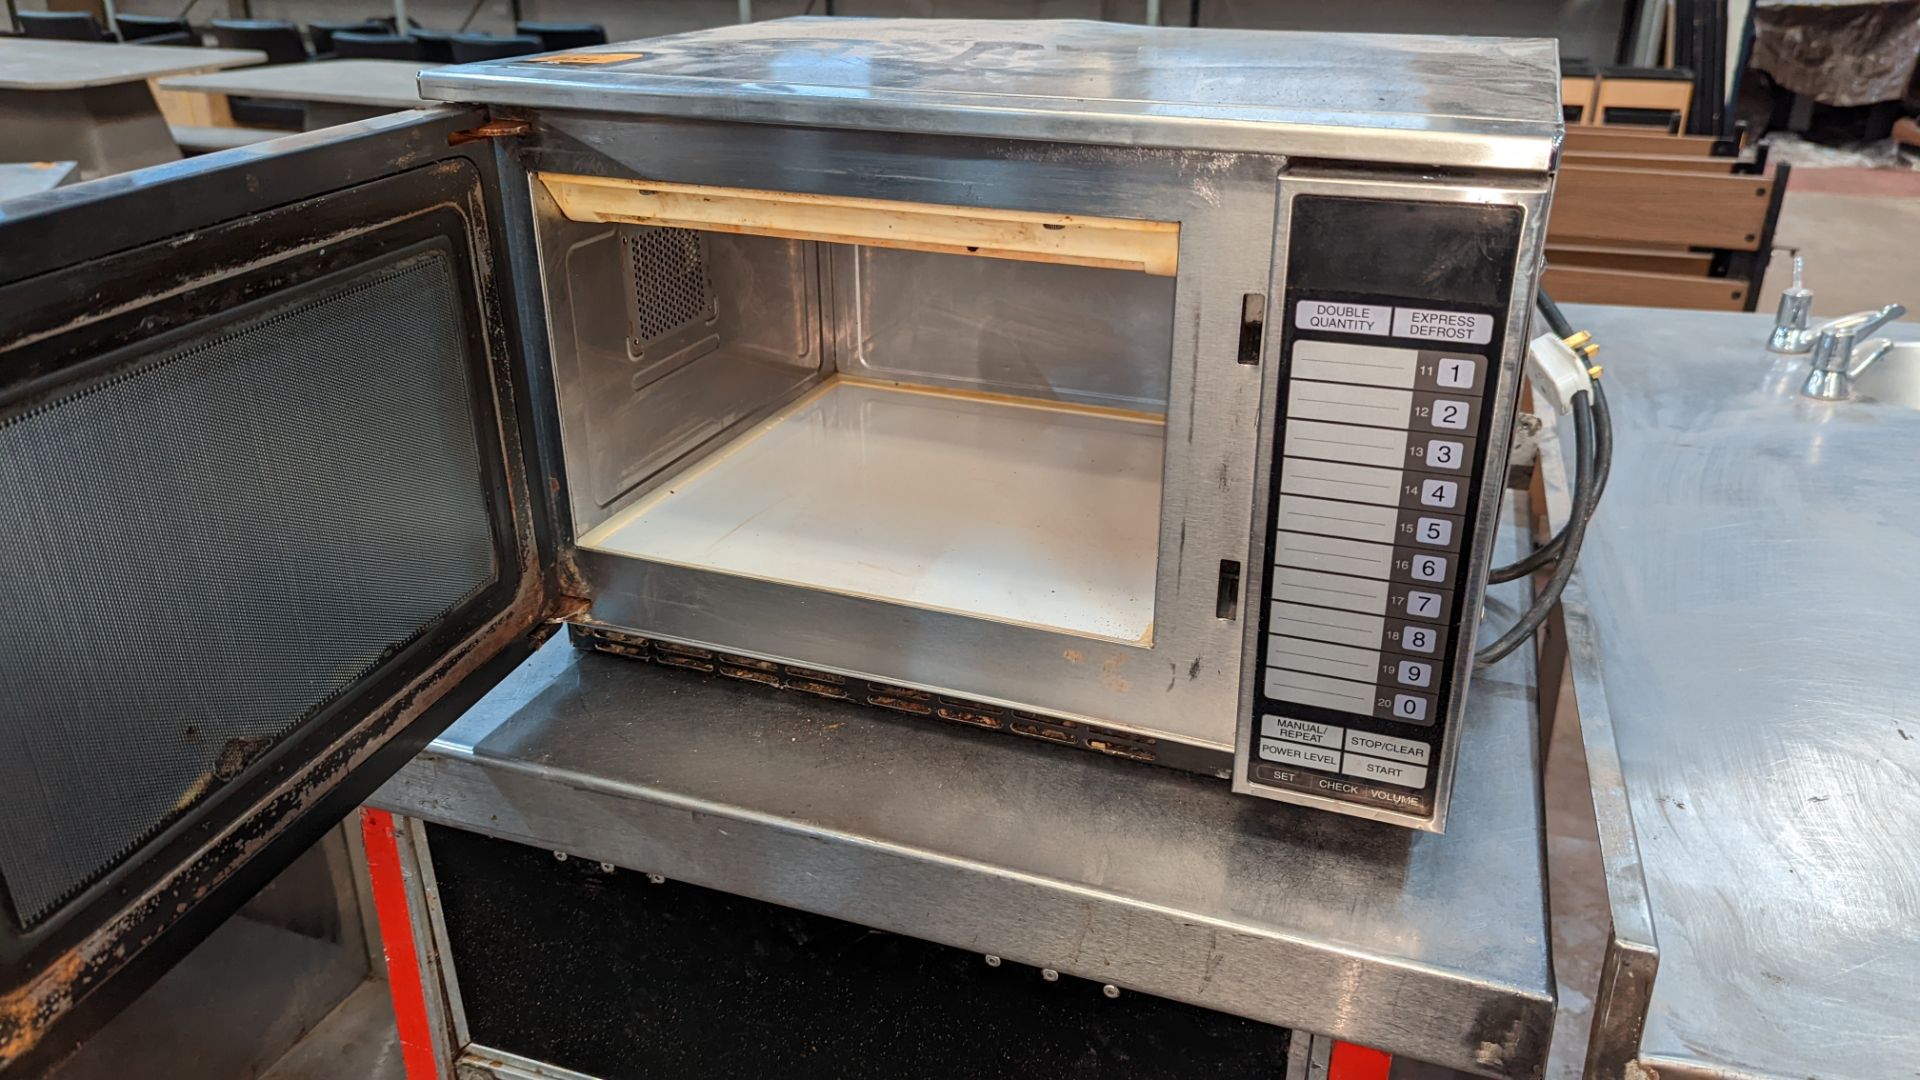 Sharp commercial microwave model 1900W/R-24AT - Image 4 of 4